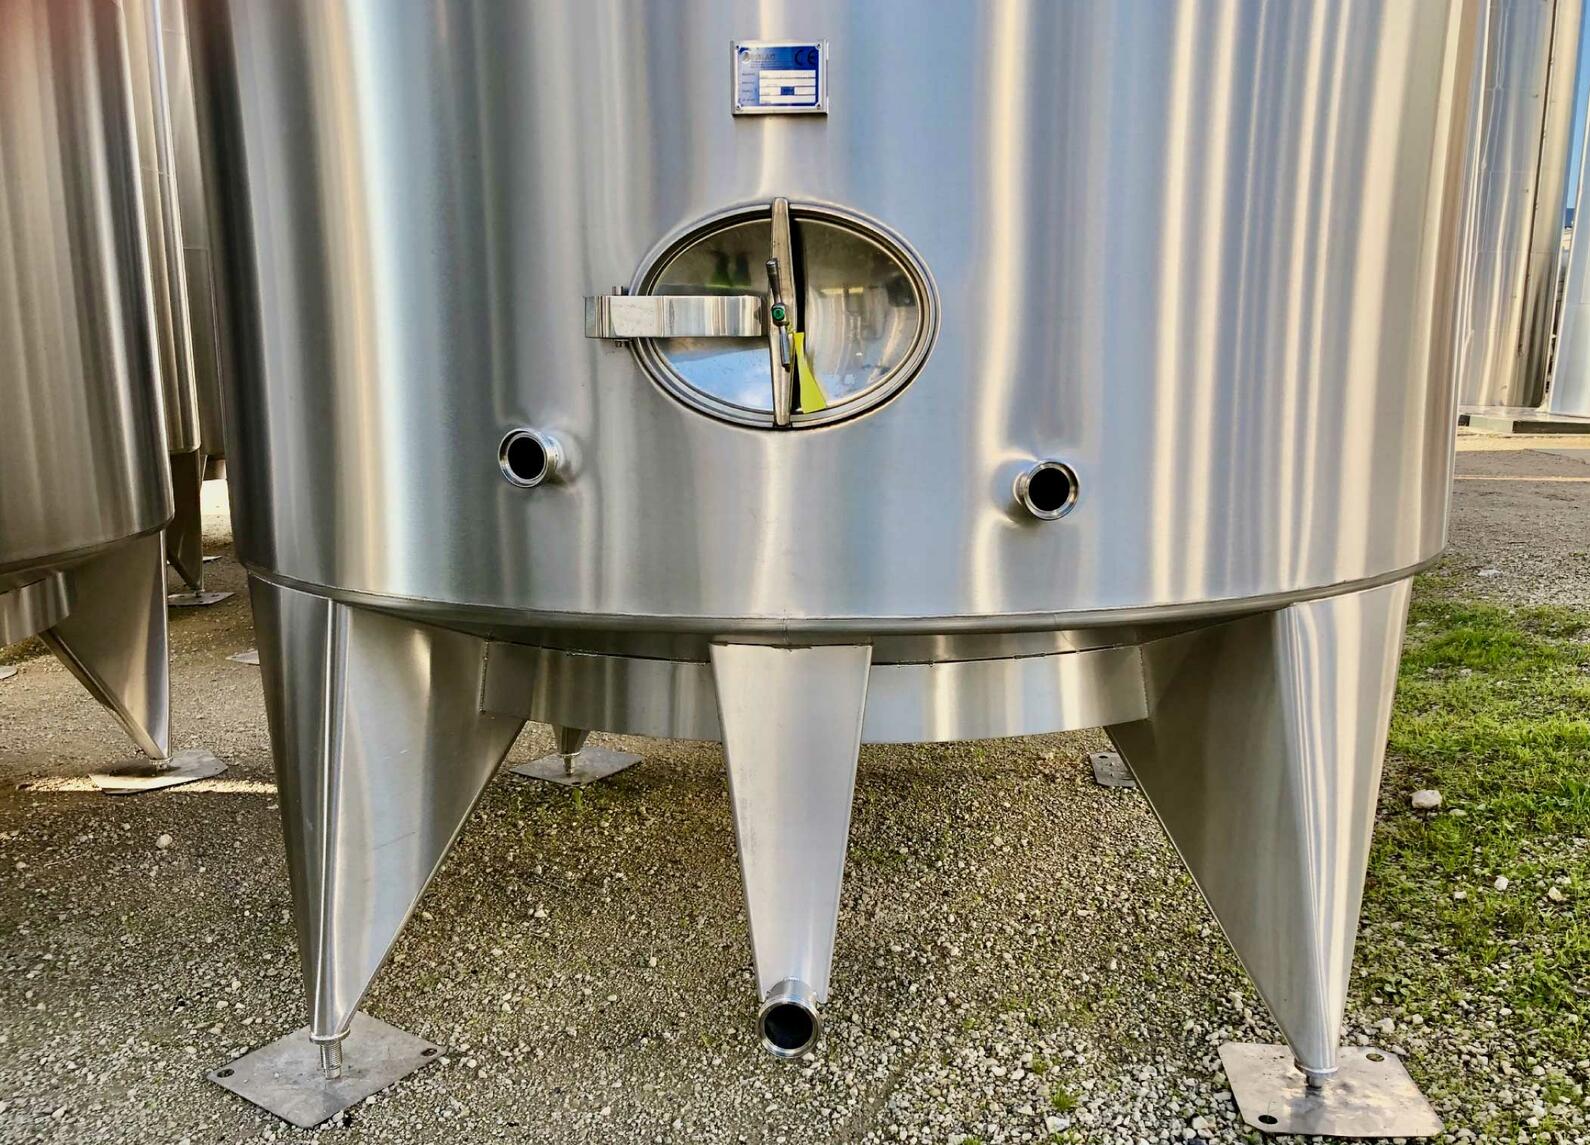 304L stainless steel storage tank - Cylindrical - Offset conical dome - 12/22-4